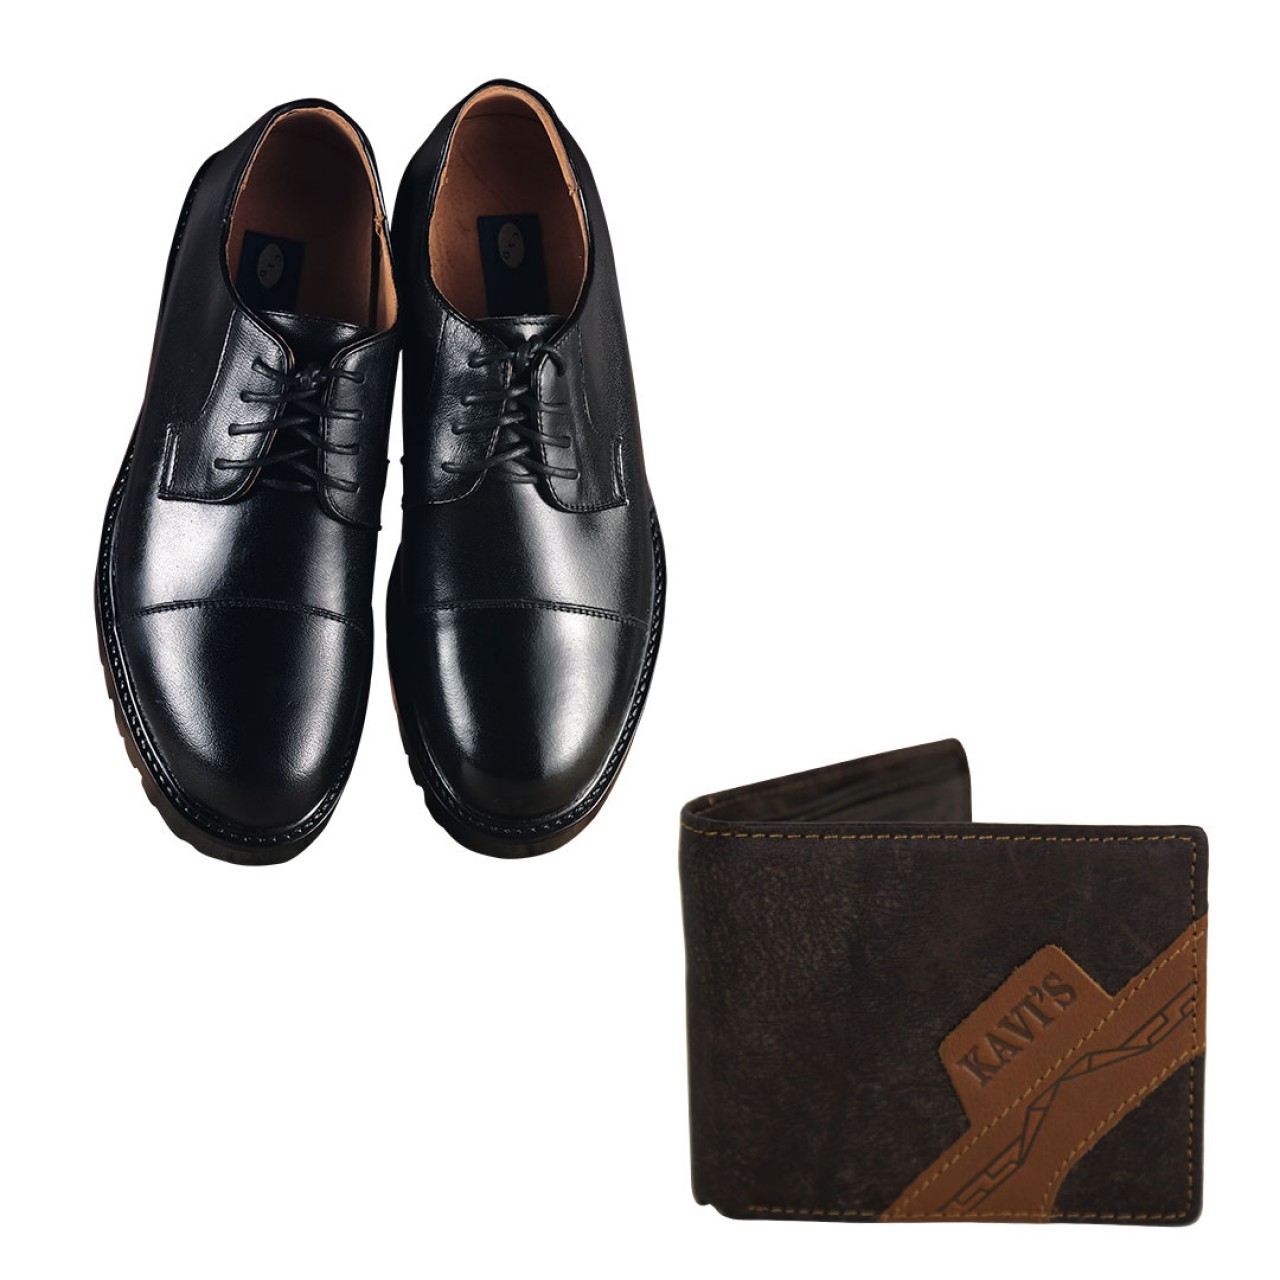 Get 4 & Pay For 2 - Genuine Leather Shoes for Men (Combo Pack of Oxford Shoes, Wallet, Watch & Sunglass)